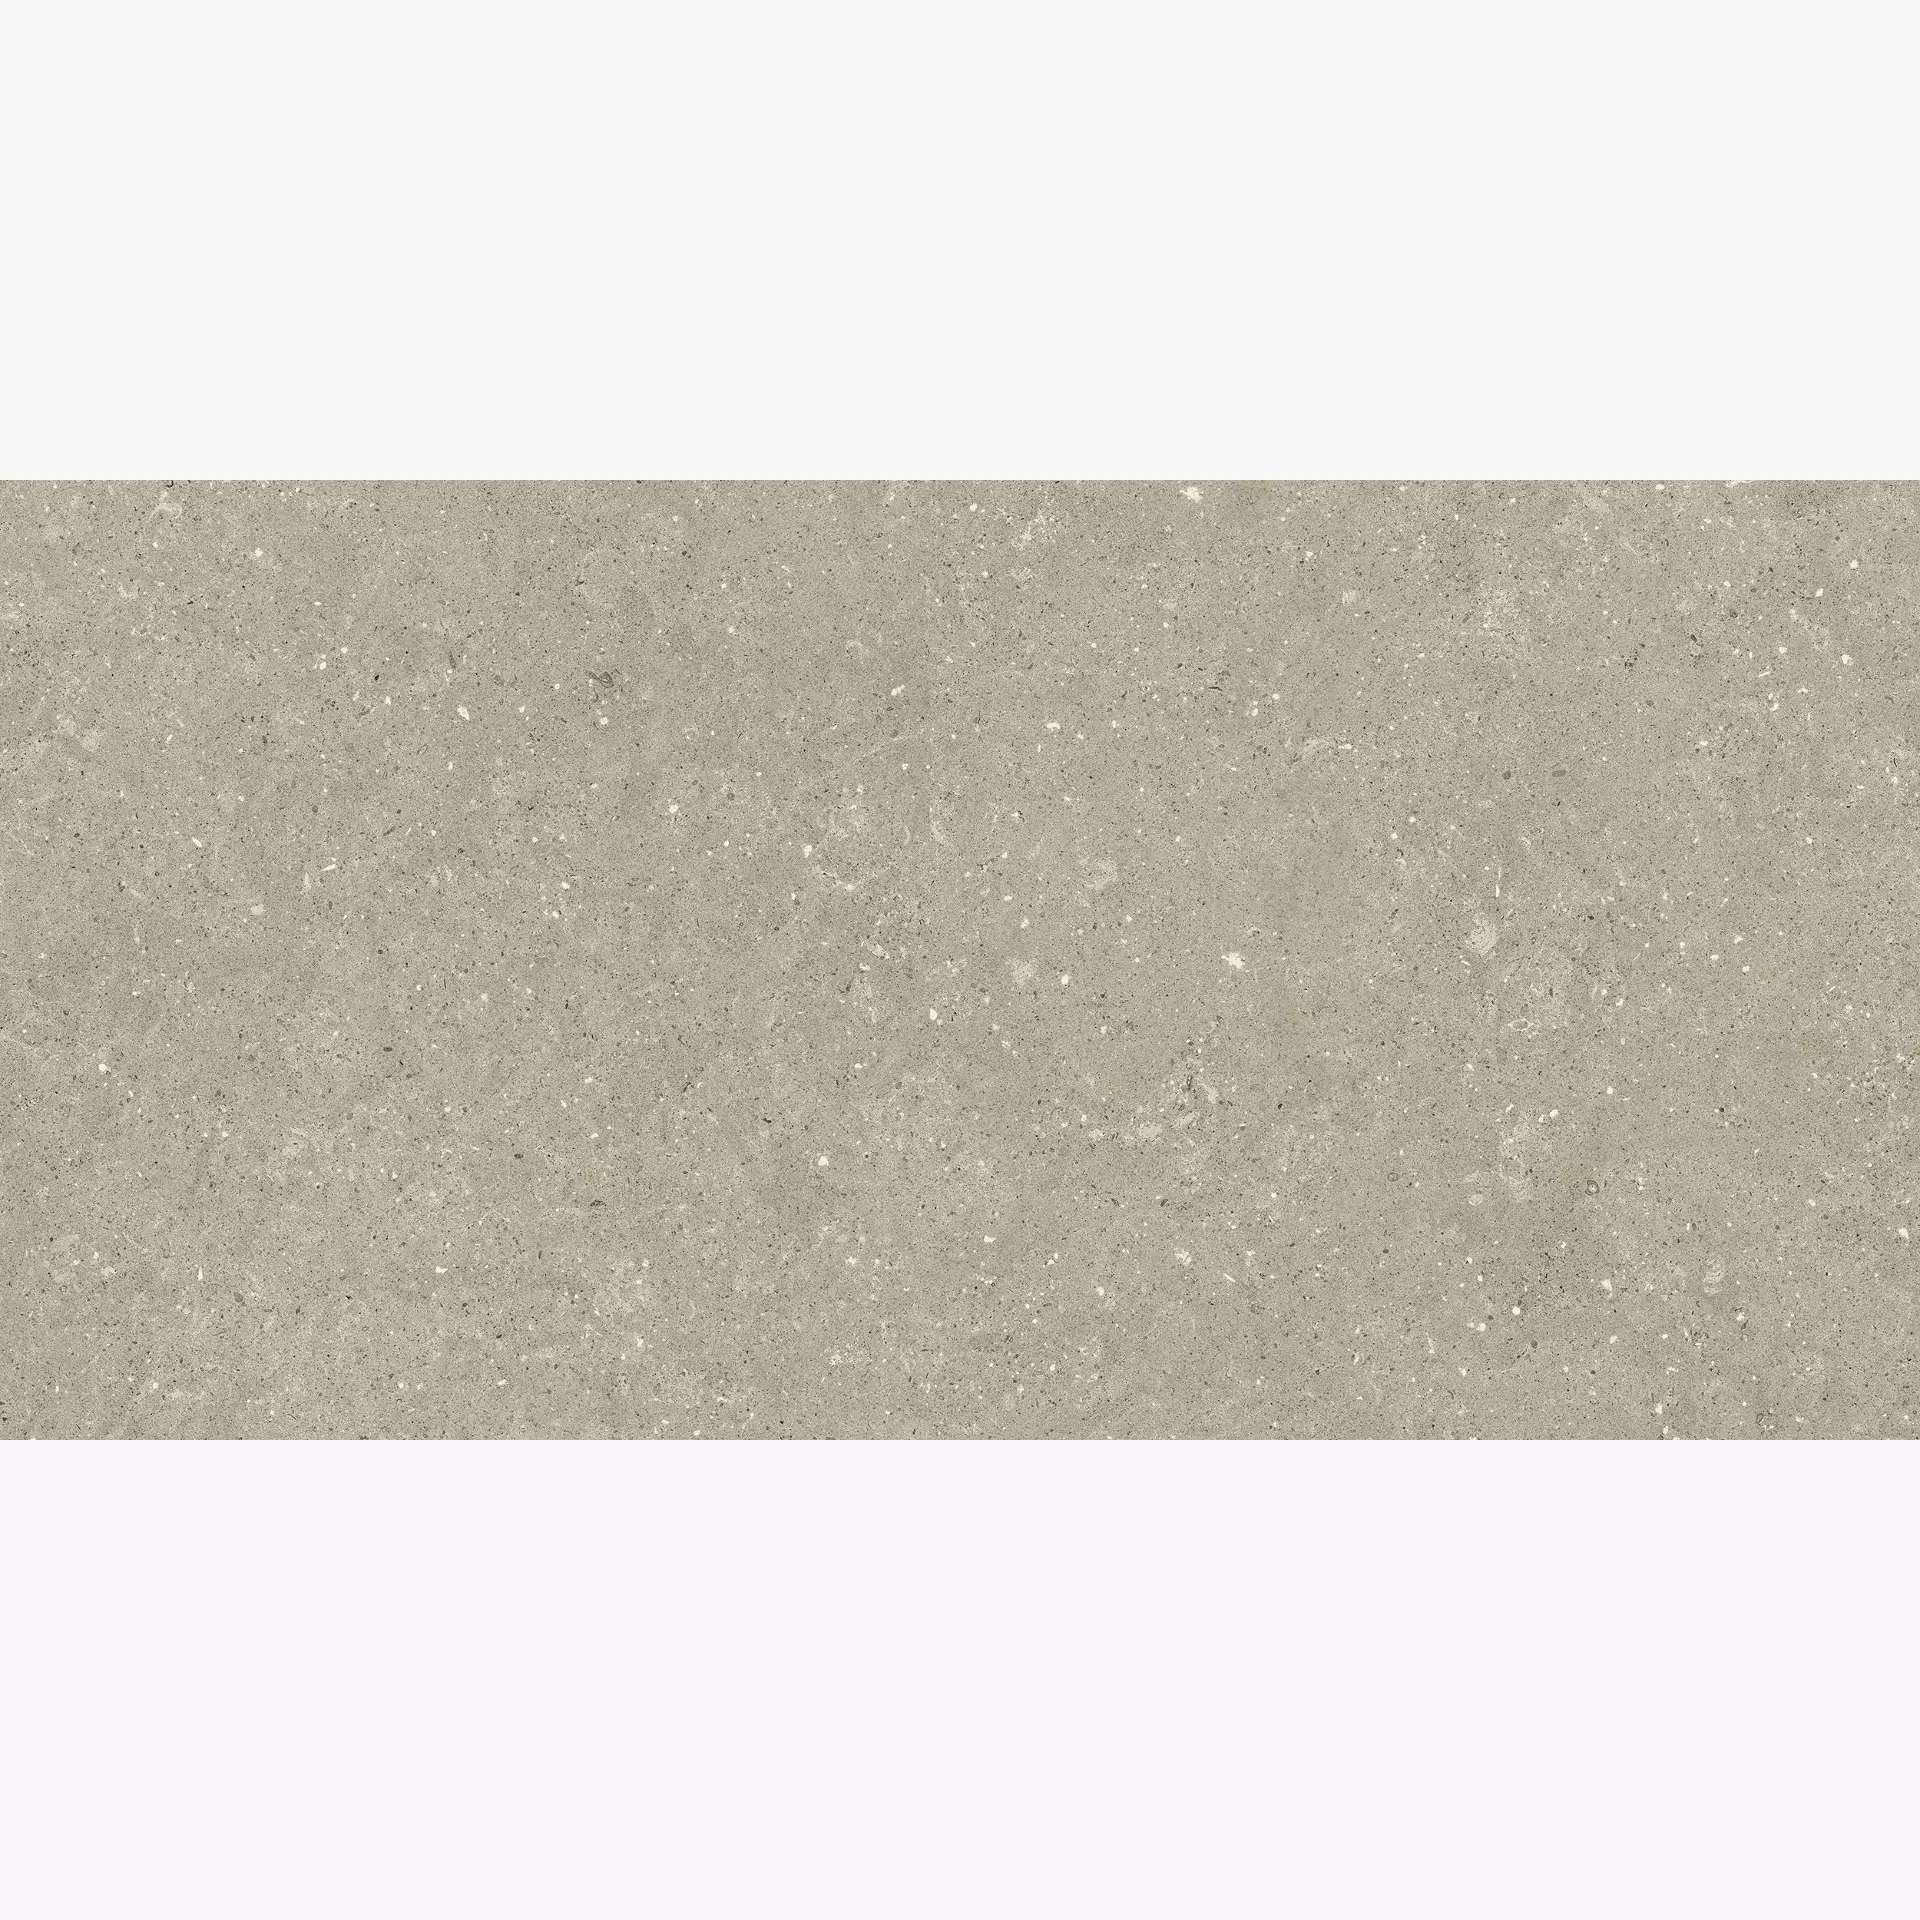 Del Conca Hwd2 Wild2 Greige Hwd211 Naturale SCWD11R 60x120cm rectified 20mm